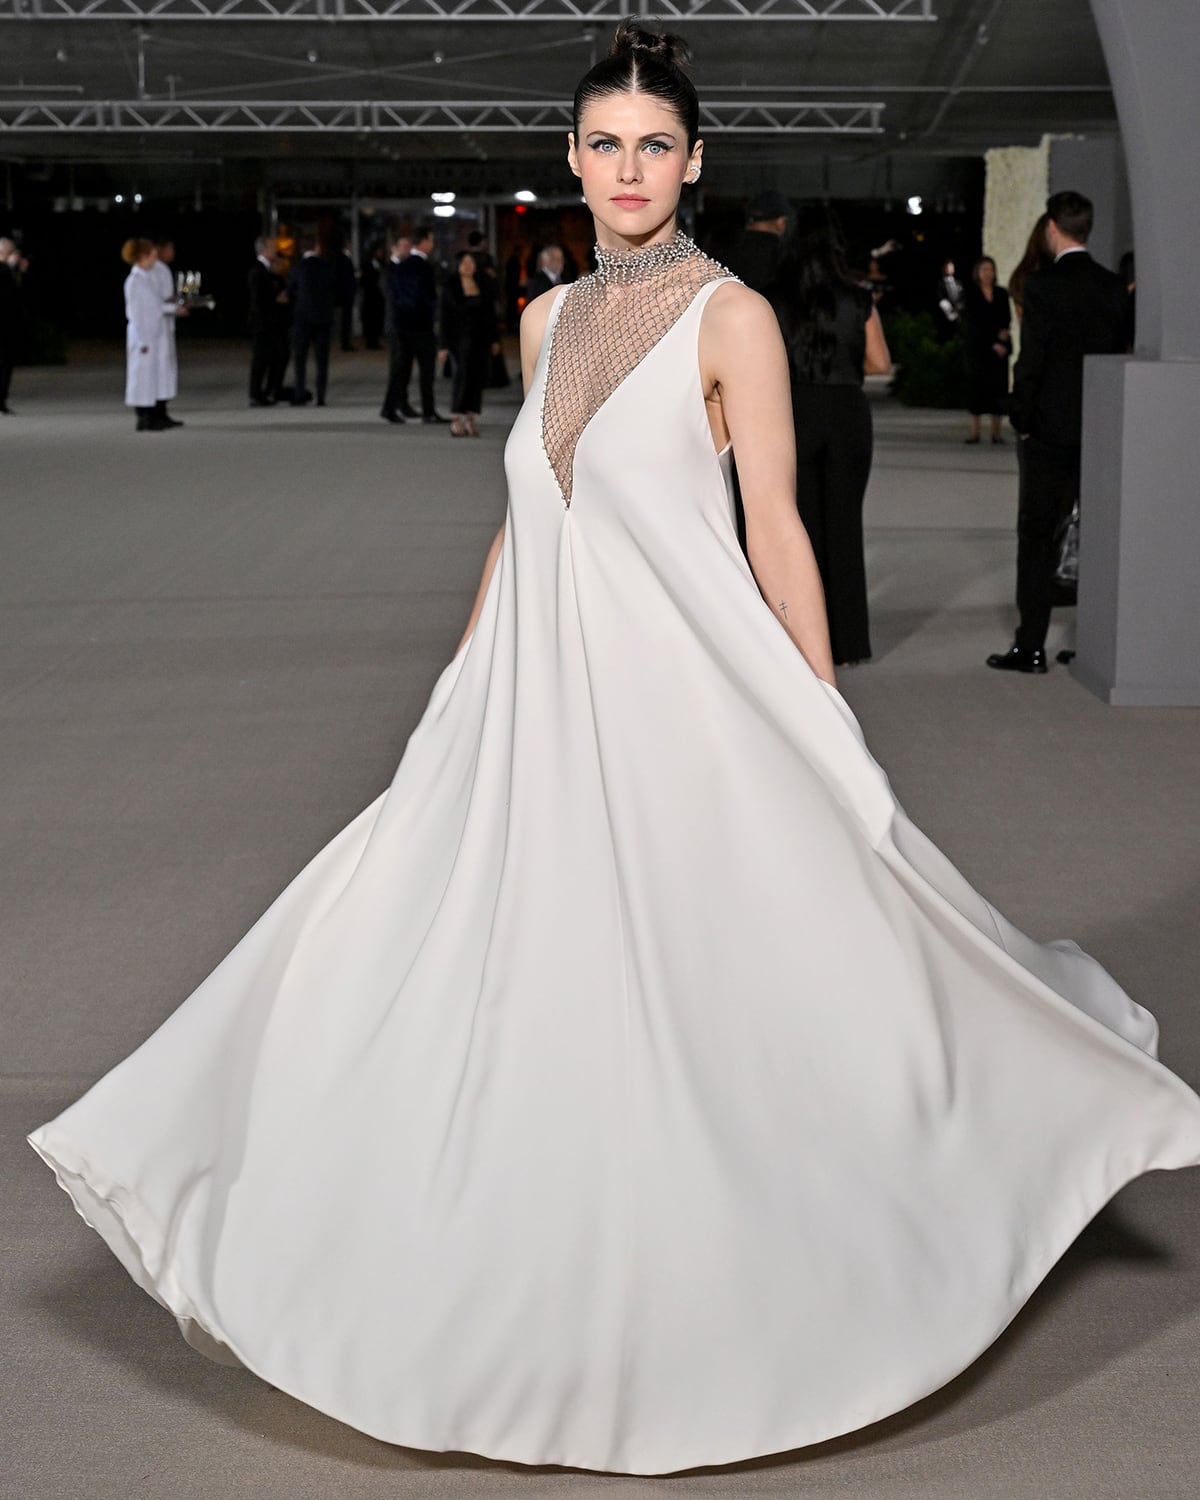 Opting for edgy glam at the 2nd Annual Academy Museum Gala, Alexandra Daddario turned heads in a Dior white gown